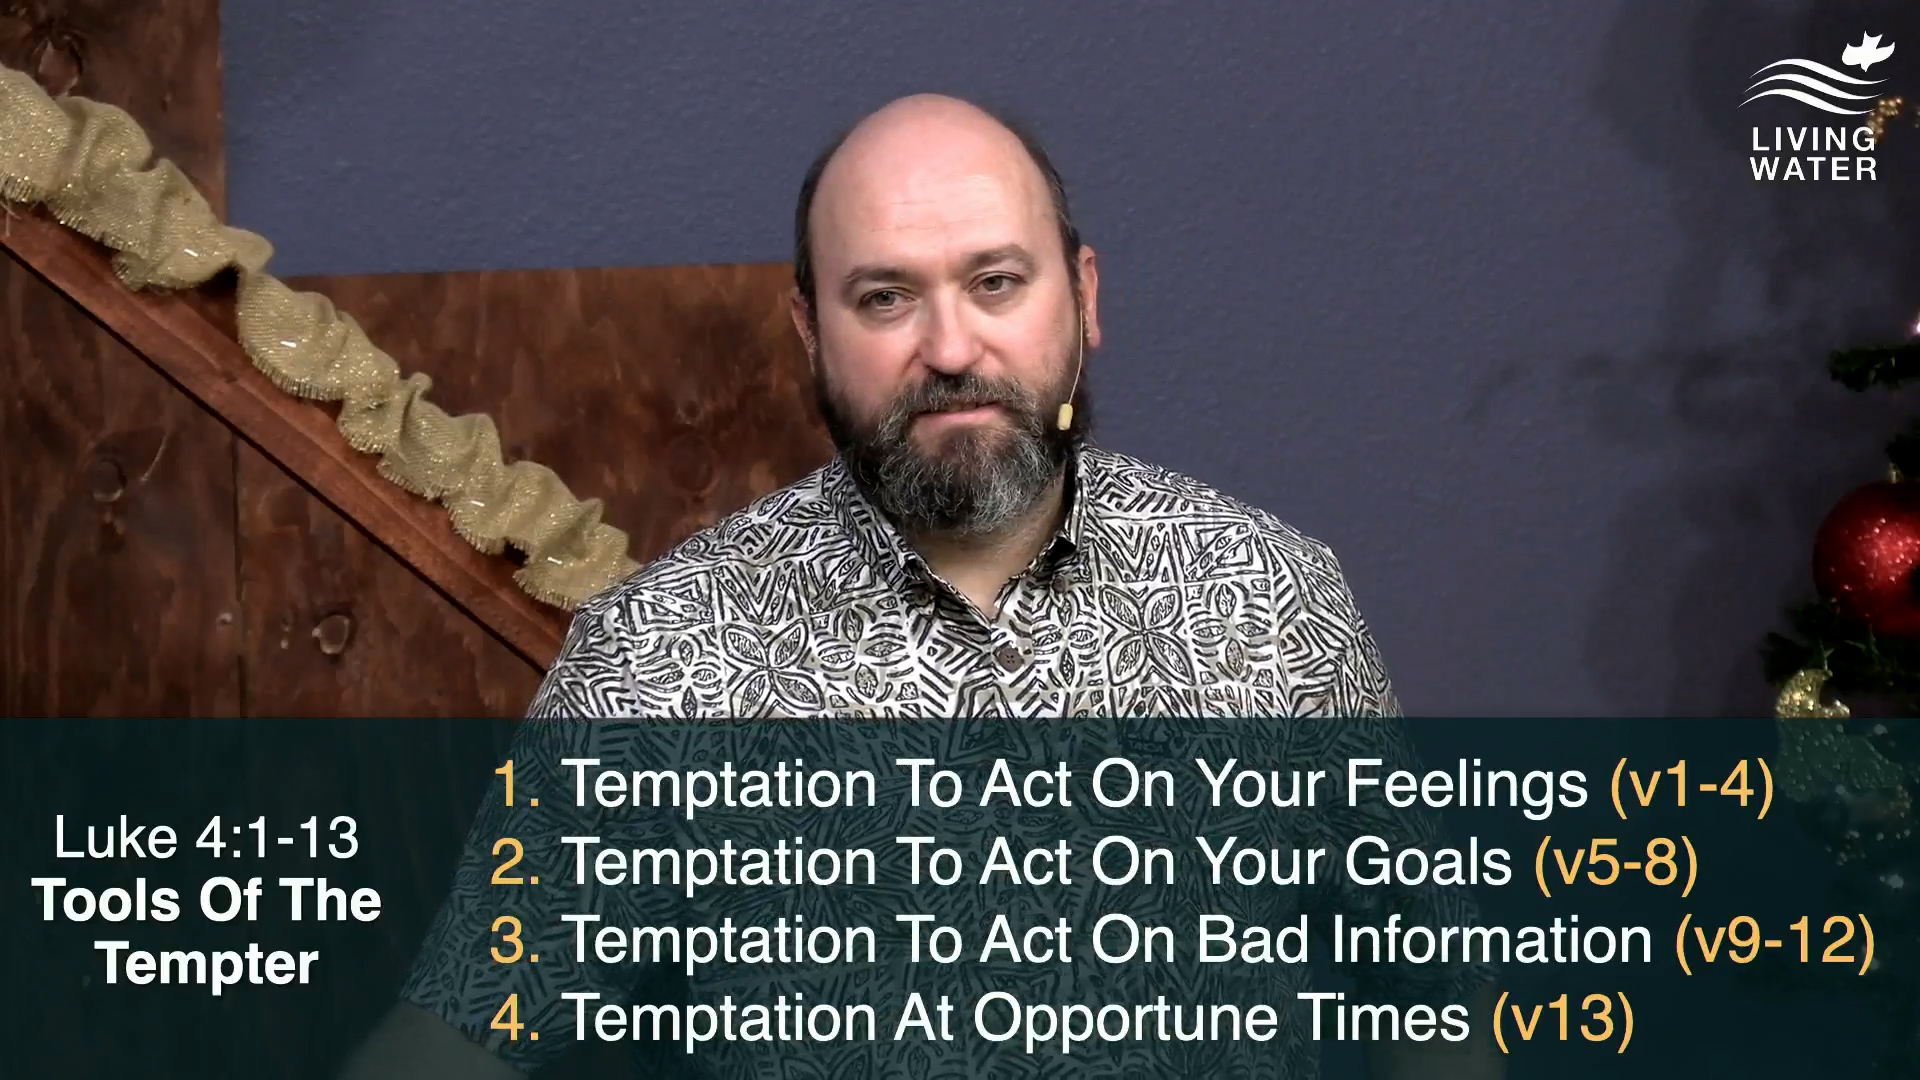 Pastor Jerry Simmons teaching Luke 4:1-13, Tools Of The Tempter